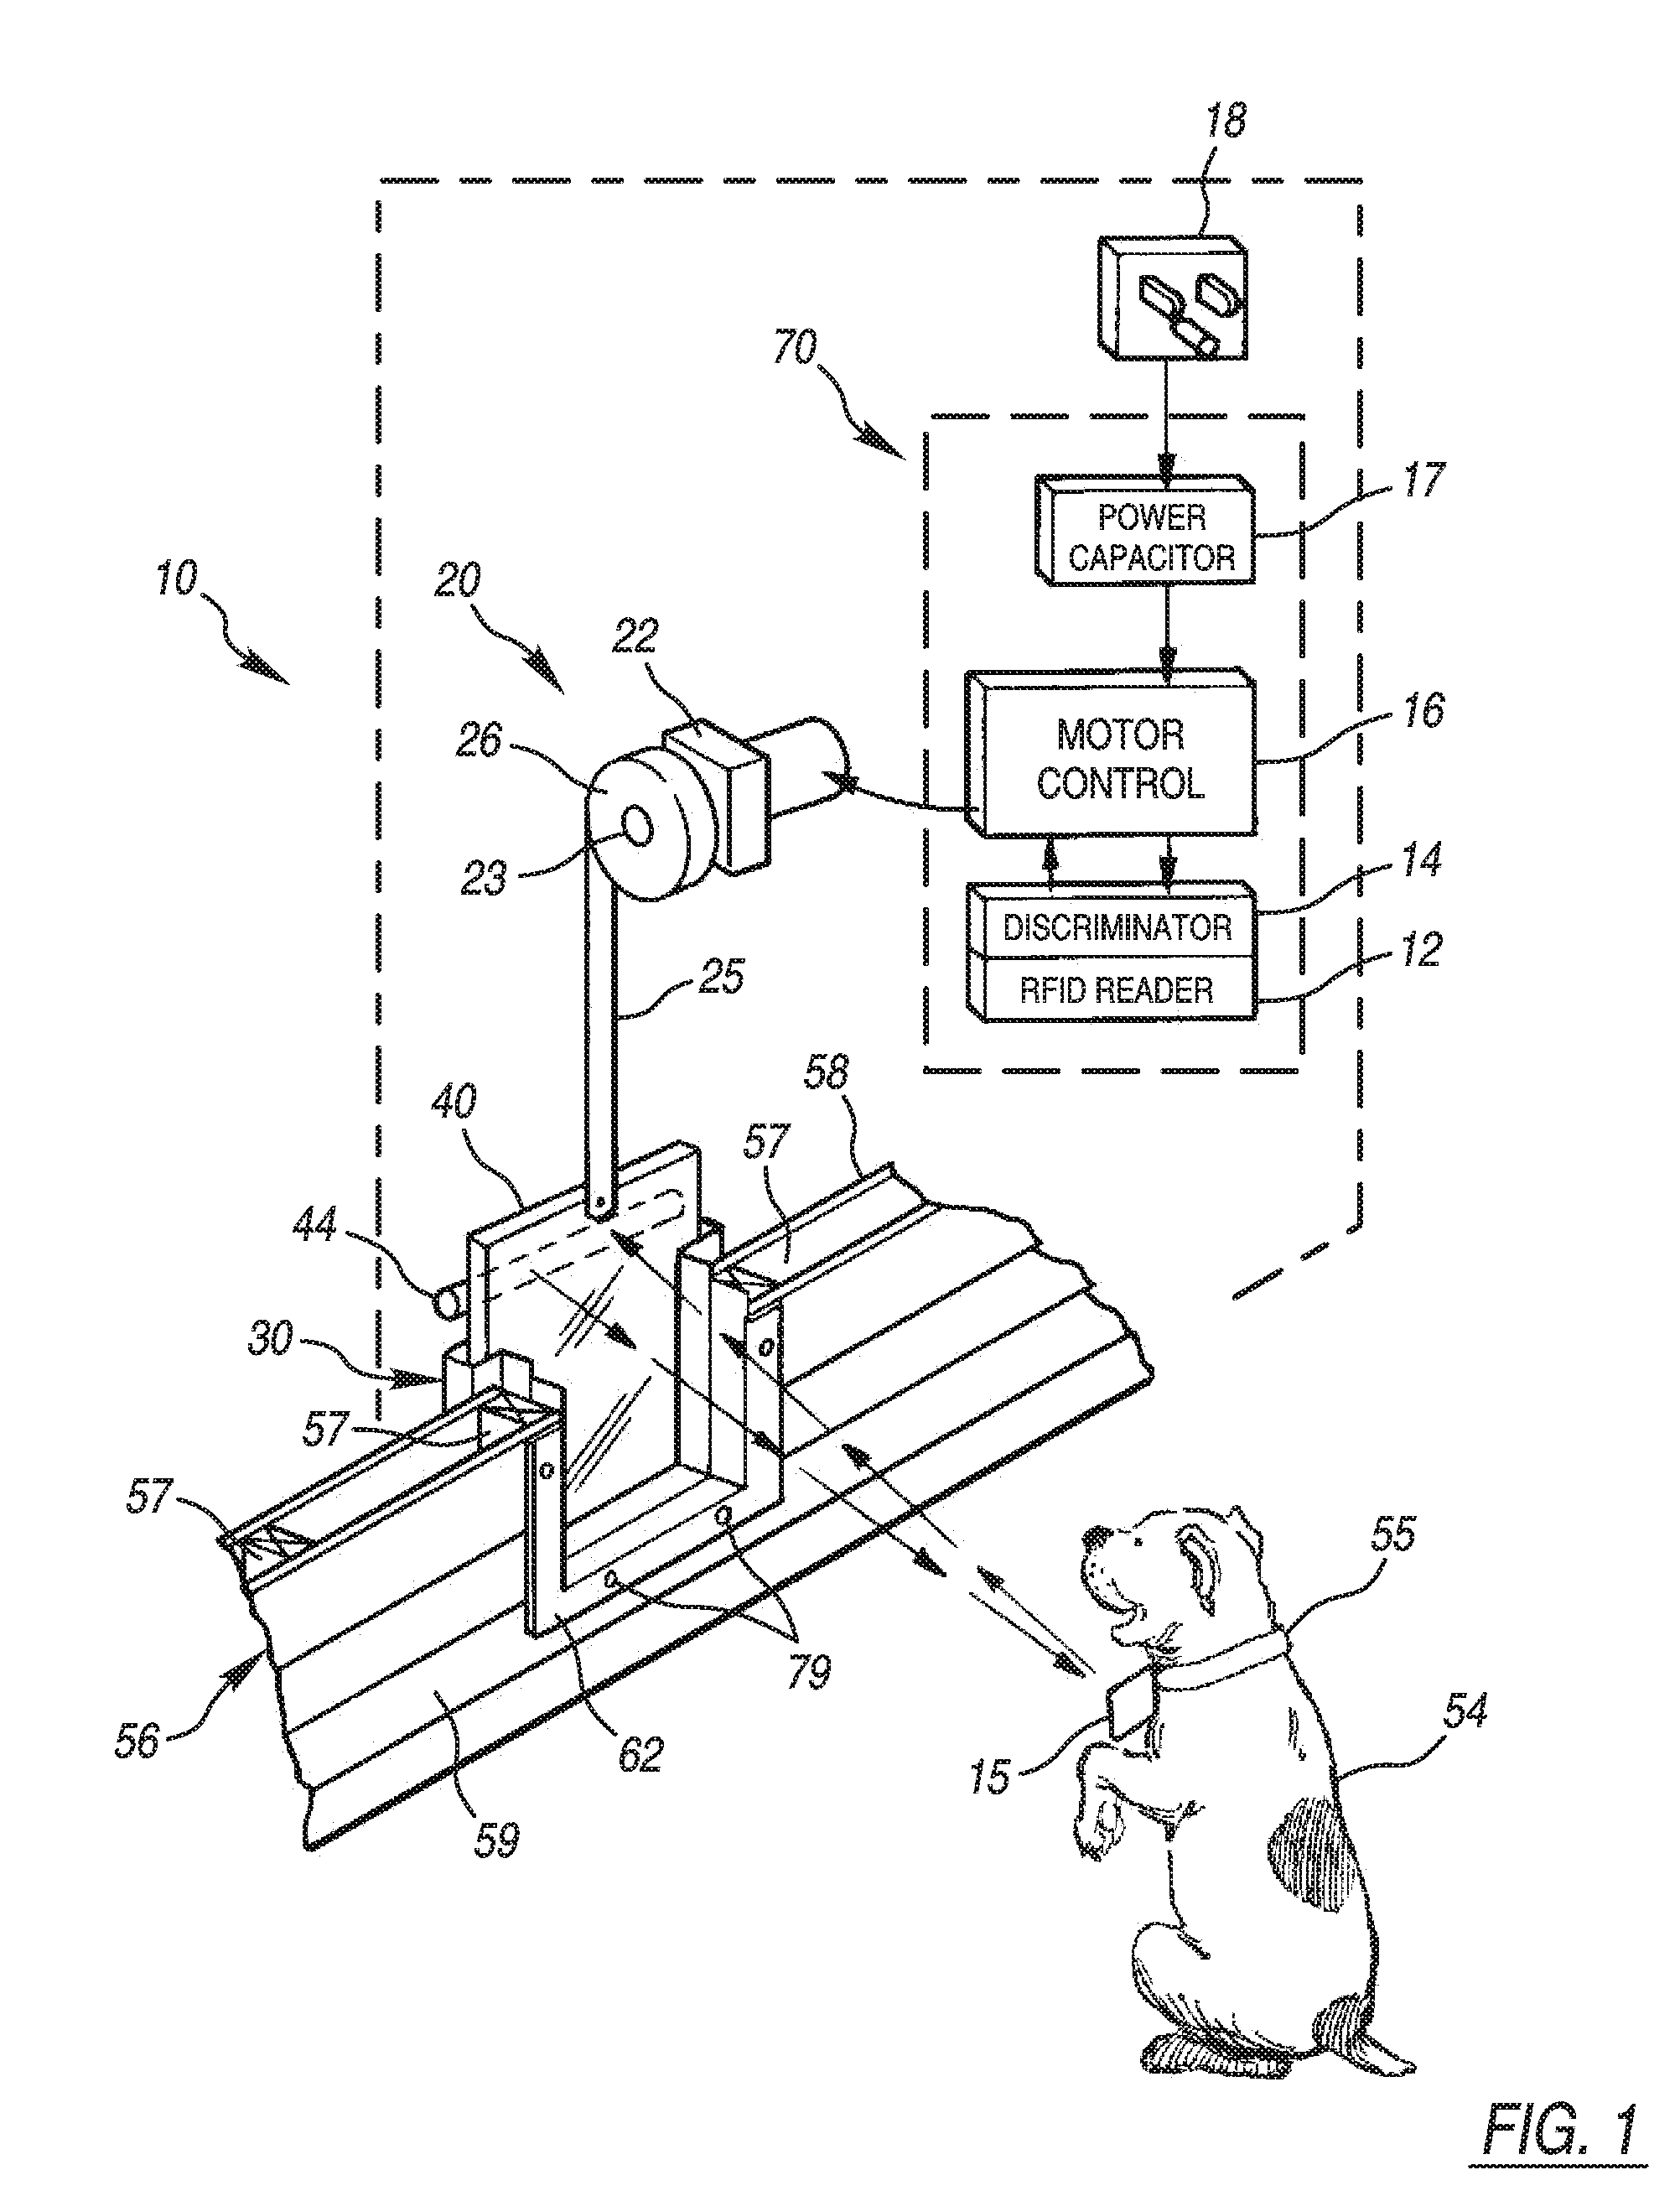 Spring-Assisted Mechanism for Raising and Lowering a Load